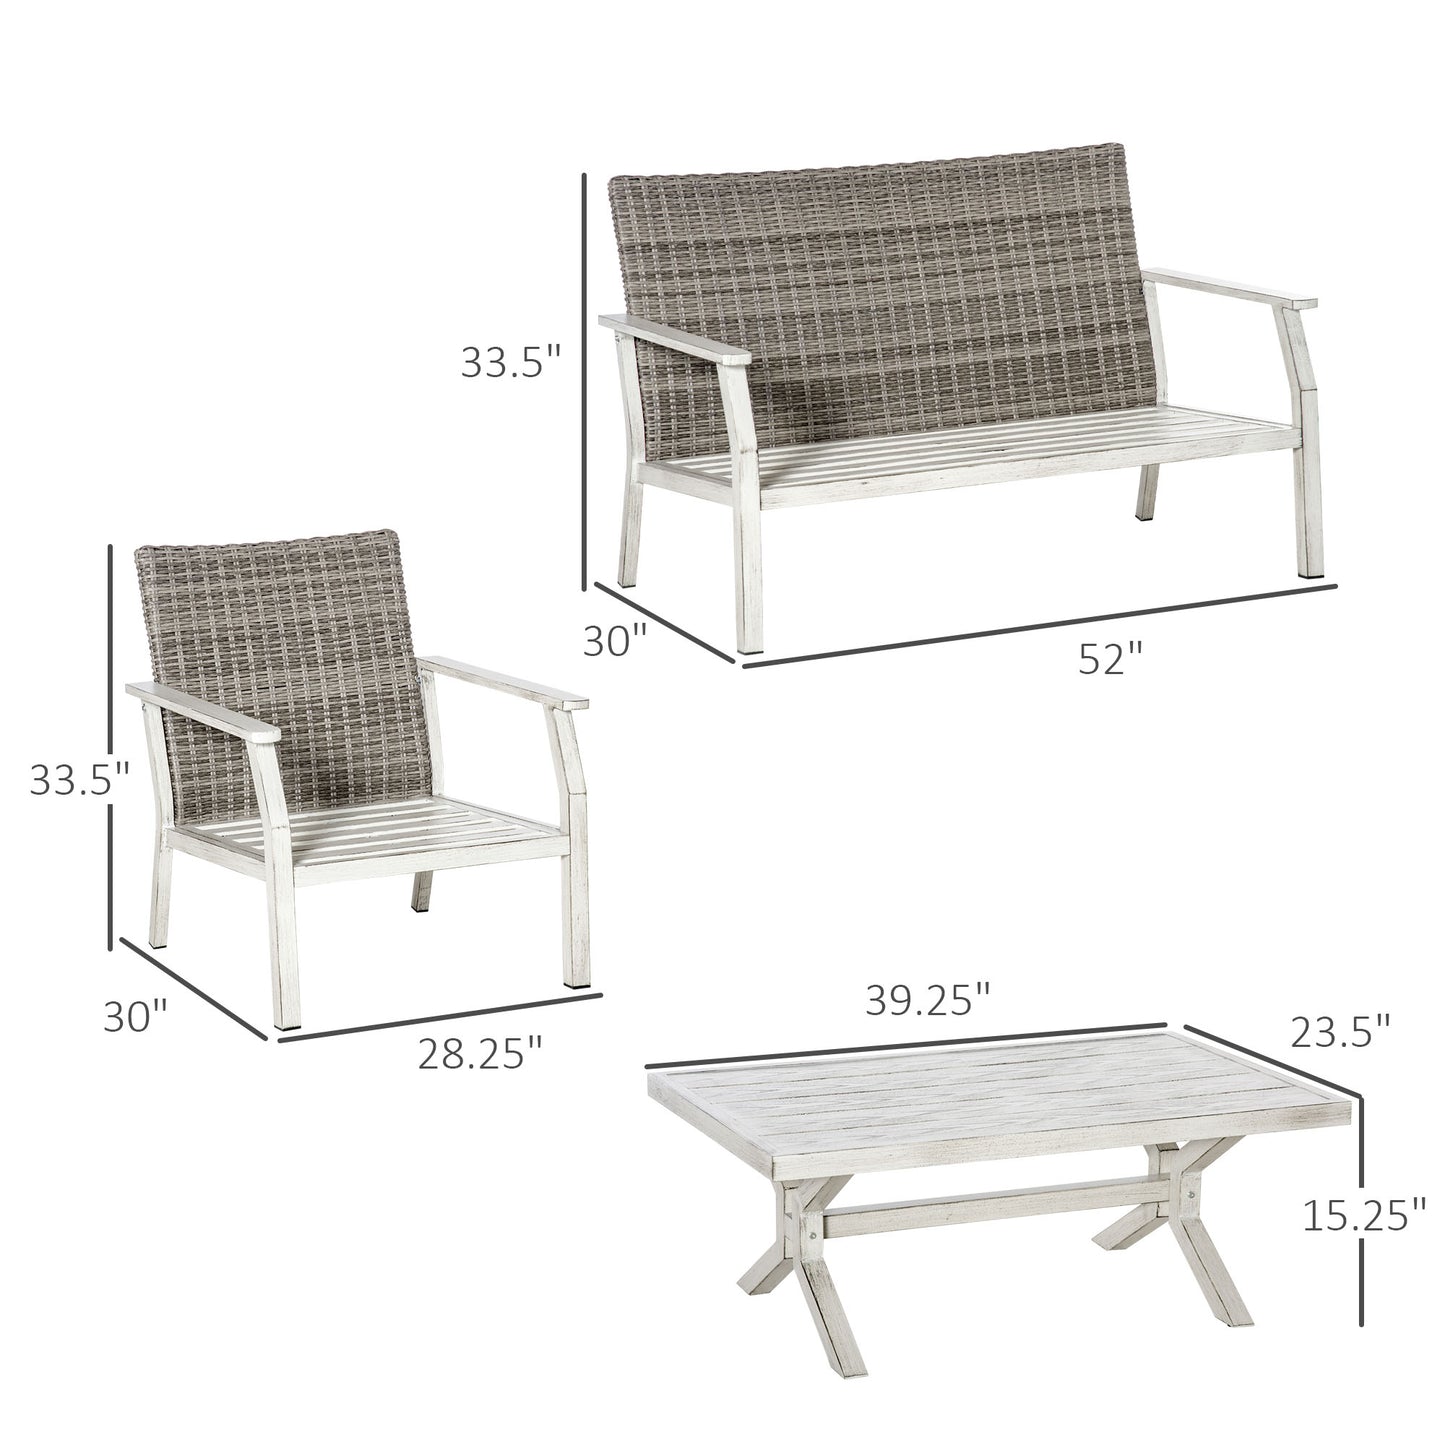 4 Pieces Patio Furniture Set with Cushions, Outdoor Wicker Conversation Sofa Sets, Aluminum Frame Sofa Sets for Backyard, Poolside, Garden, Beige Patio Furniture Sets   at Gallery Canada